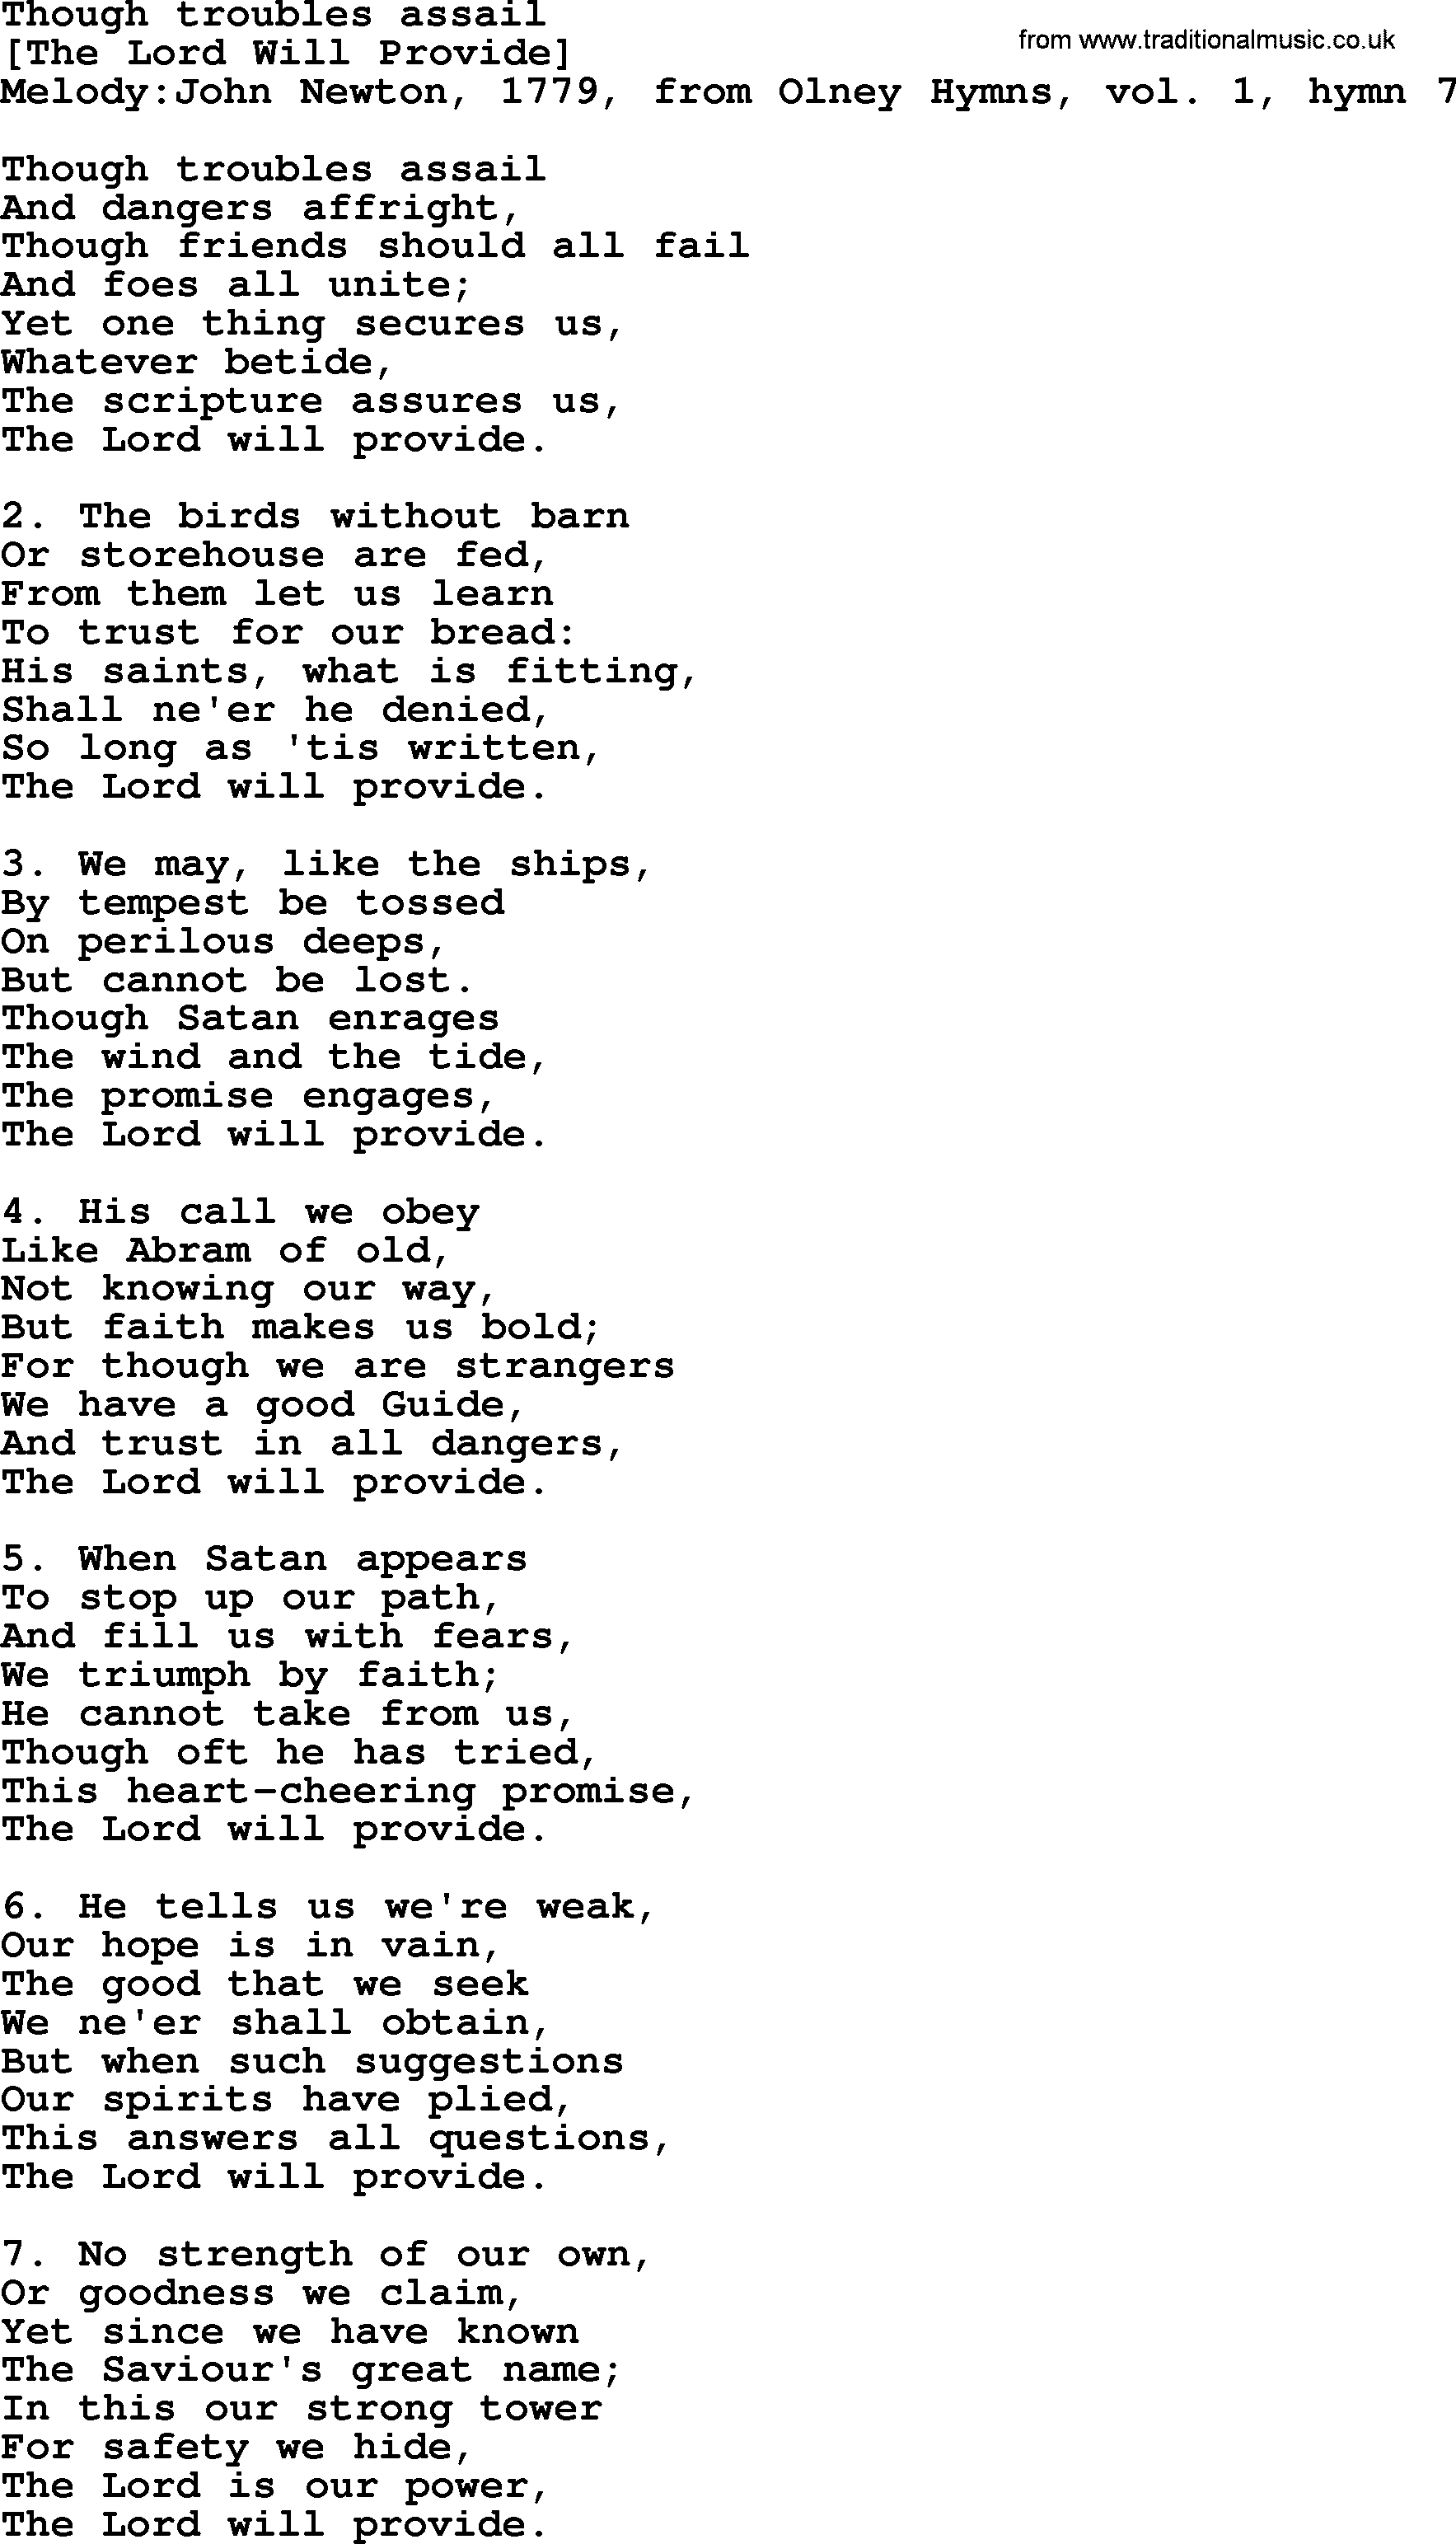 Old English Song: Though Troubles Assail lyrics